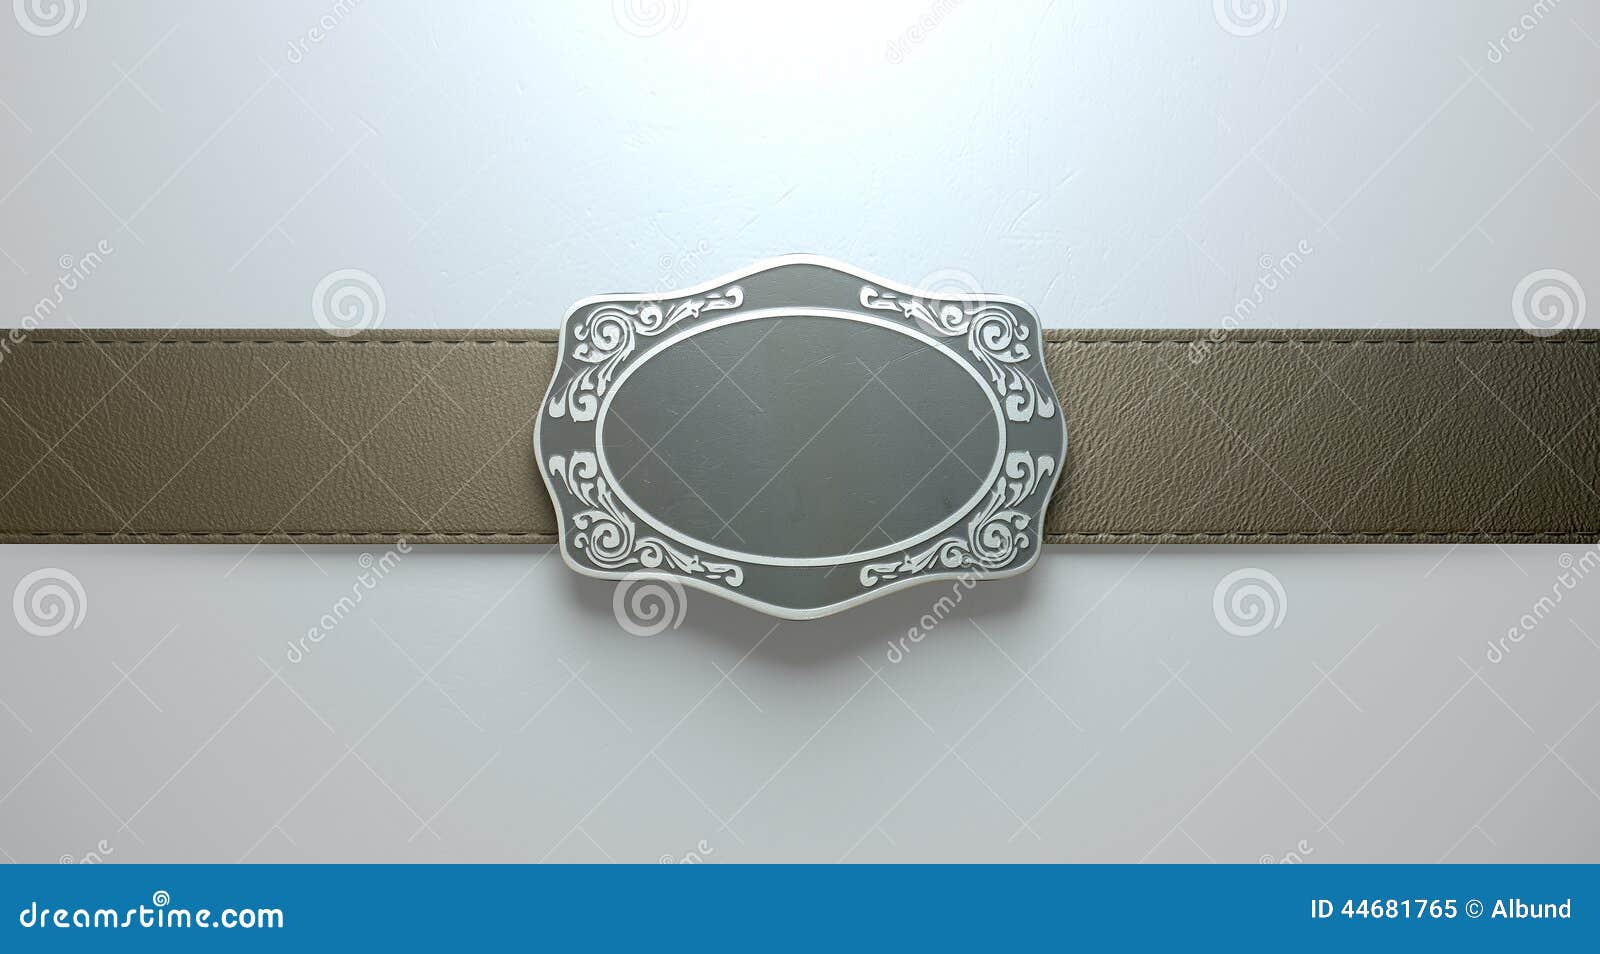 belt buckle and leather